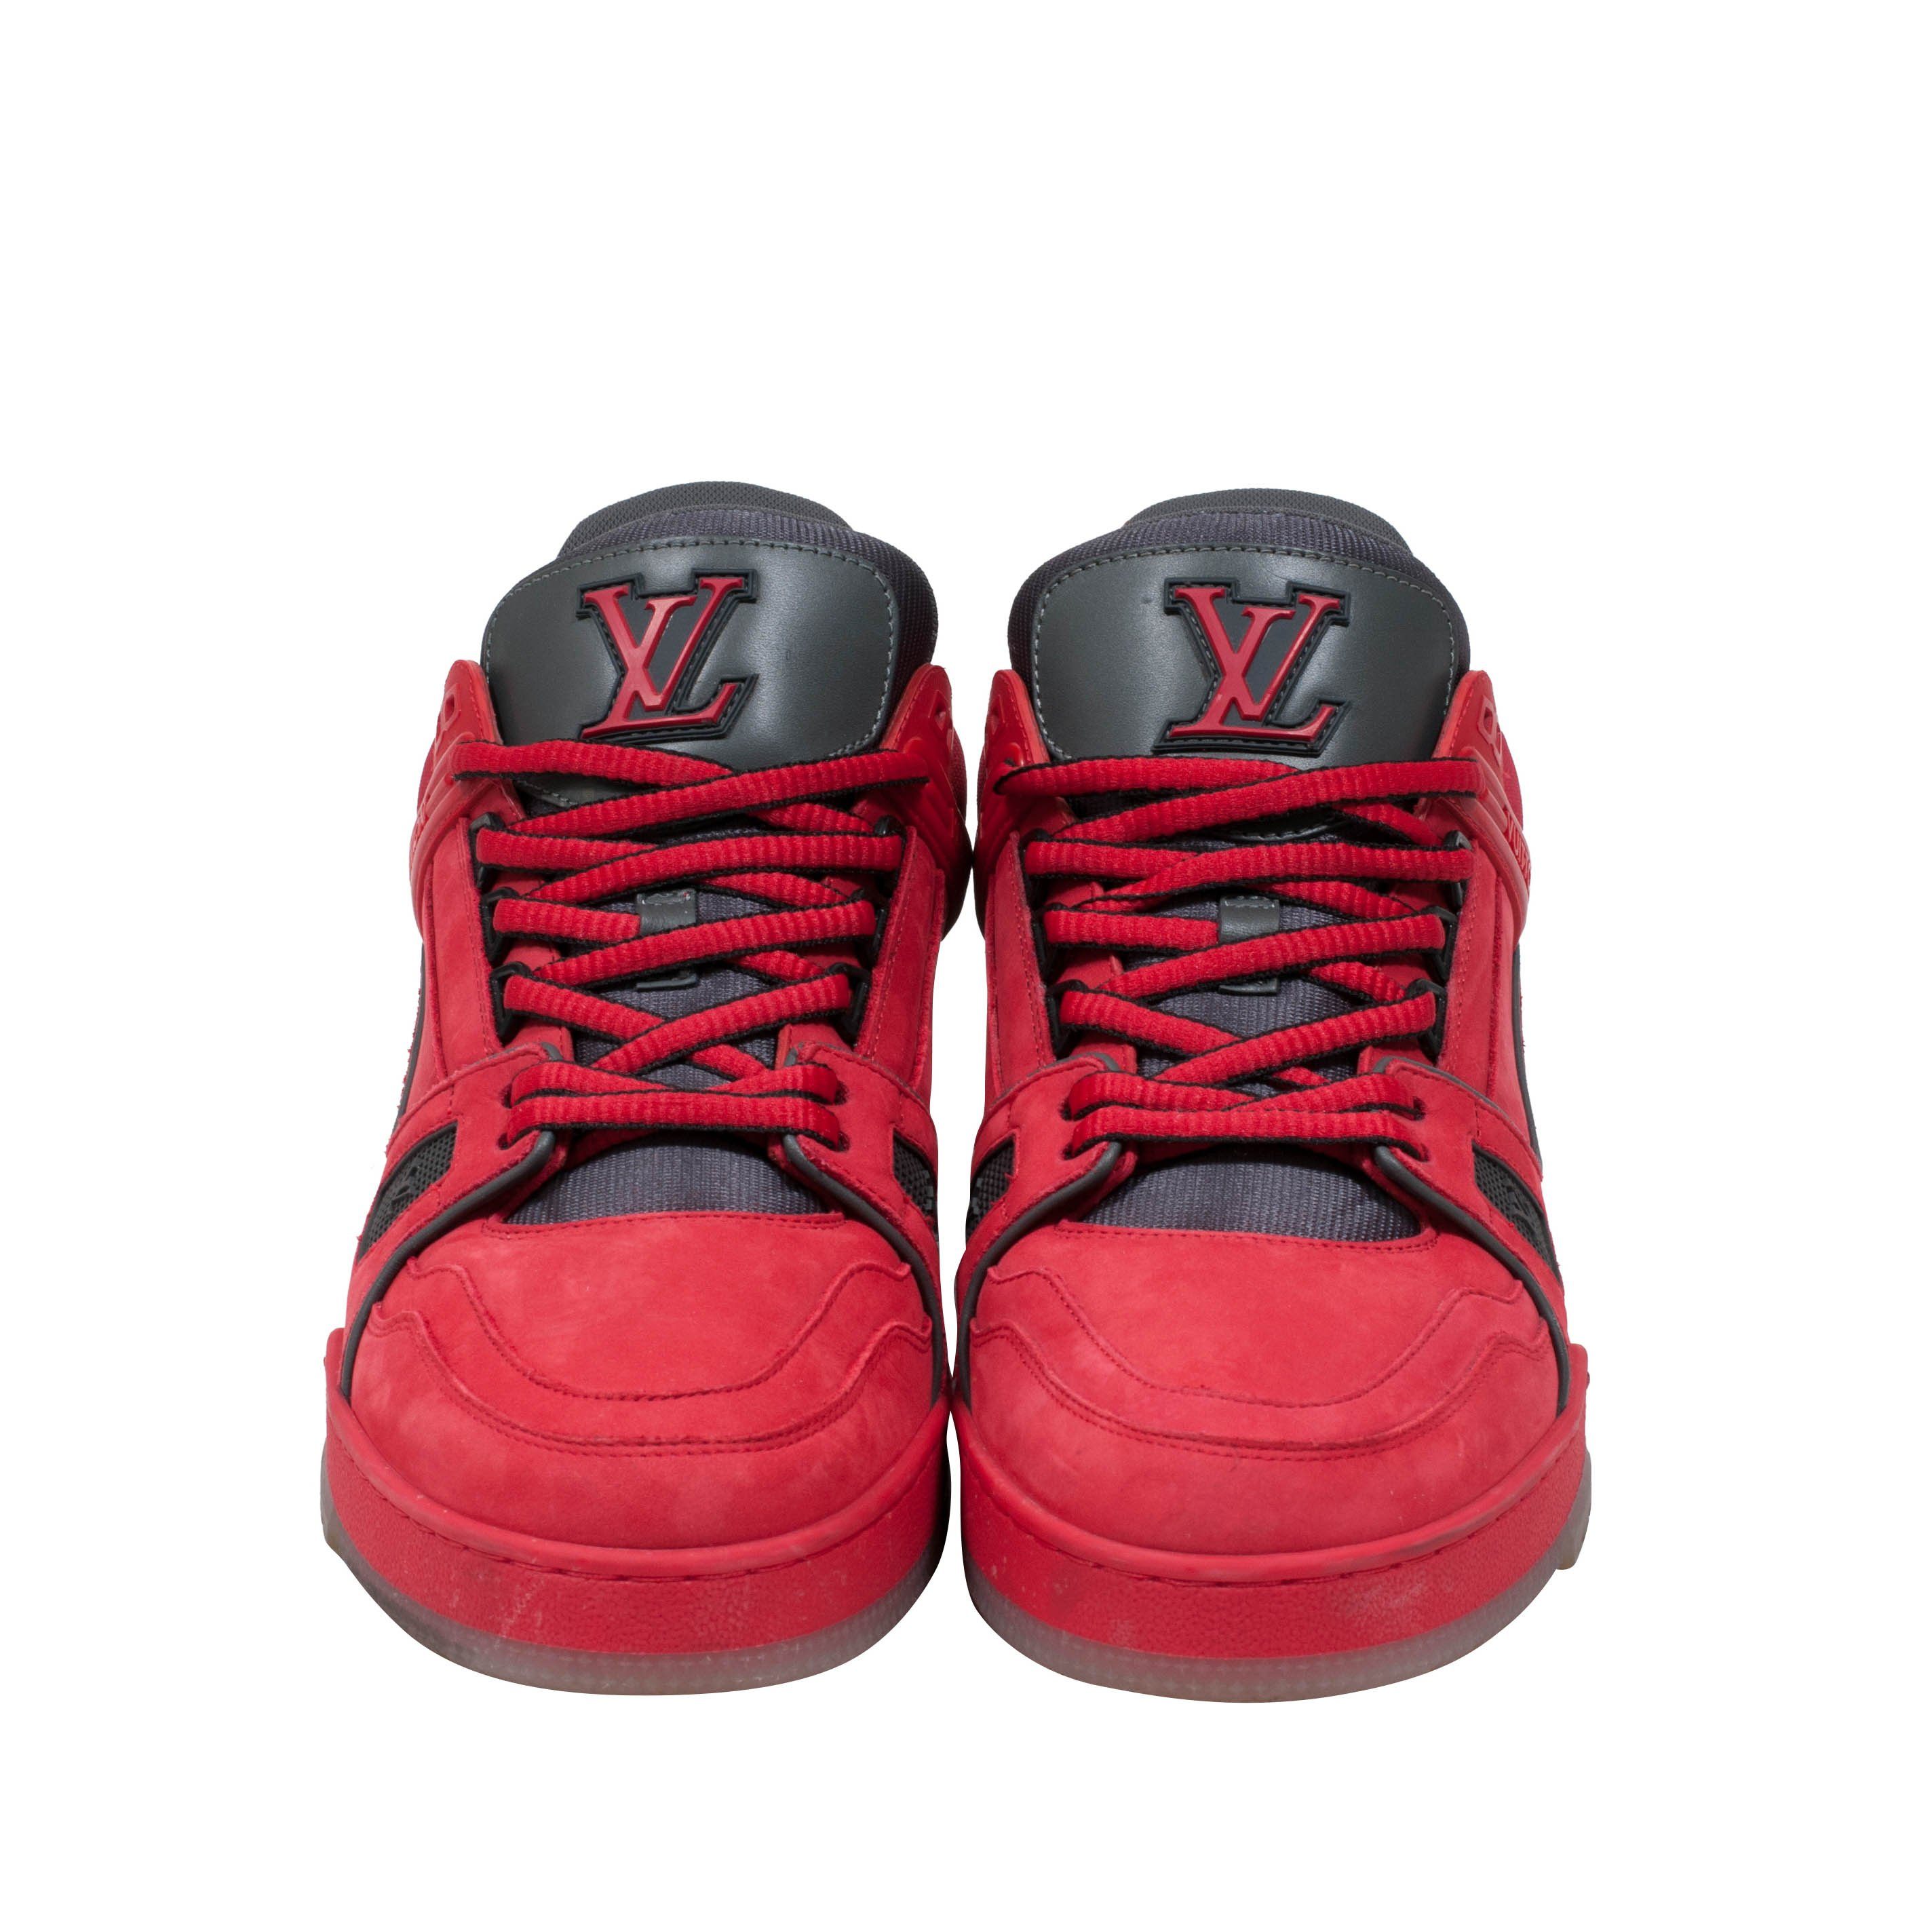 Louis Vuitton® LV Trainer Sneaker Red. Size 10.5 in 2023  Louis vuitton  sneakers, Trainer sneakers, Mens shoes sneakers